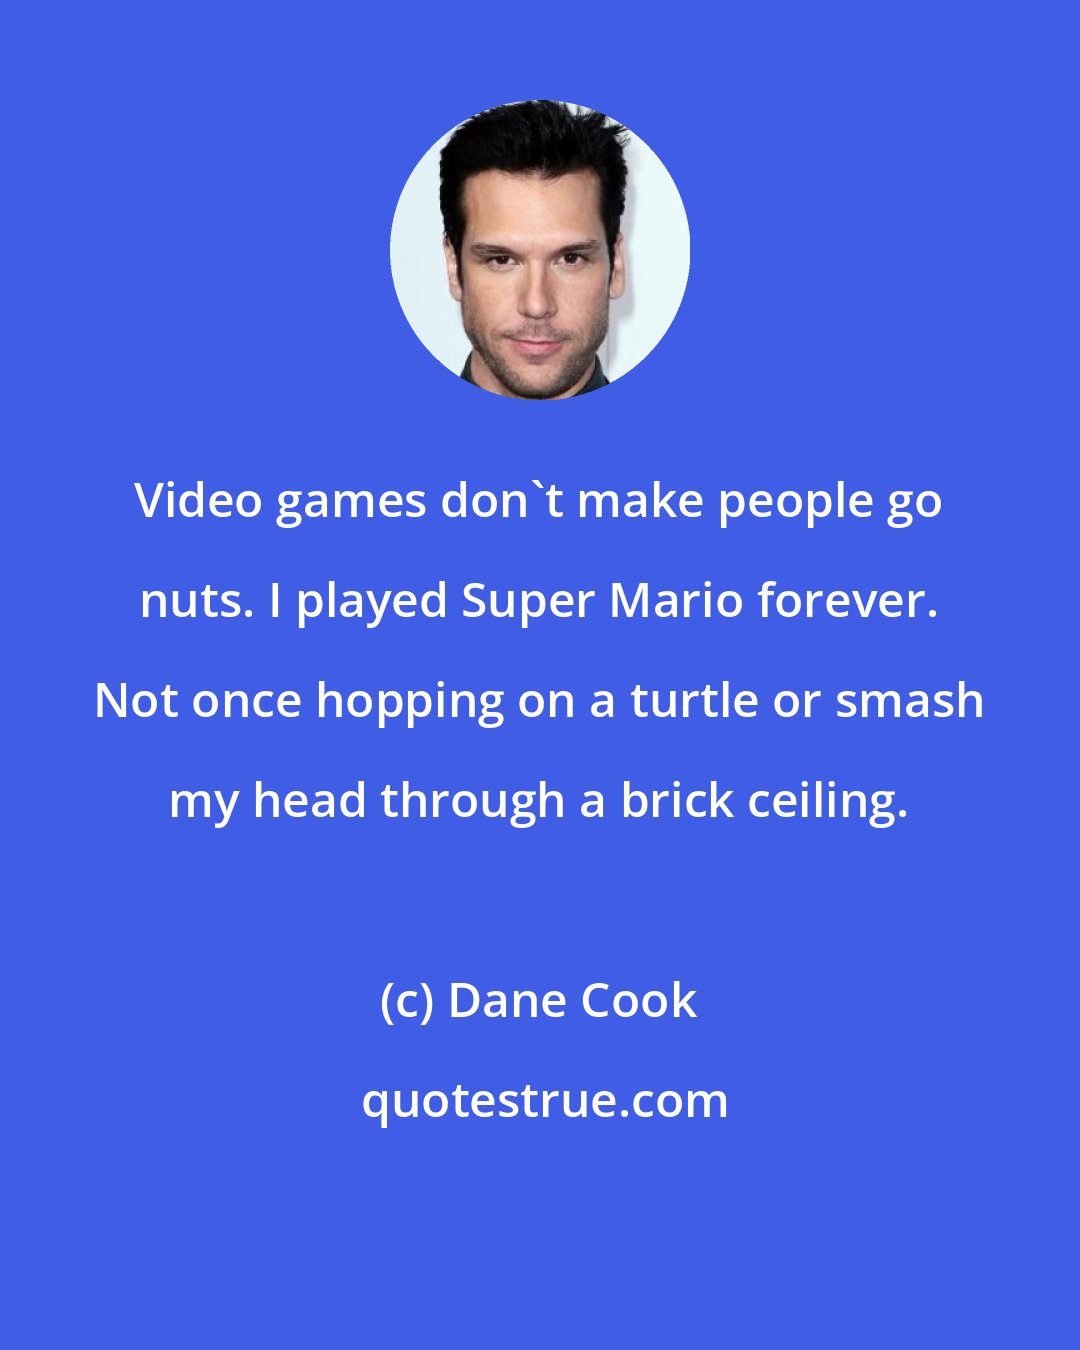 Dane Cook: Video games don't make people go nuts. I played Super Mario forever. Not once hopping on a turtle or smash my head through a brick ceiling.